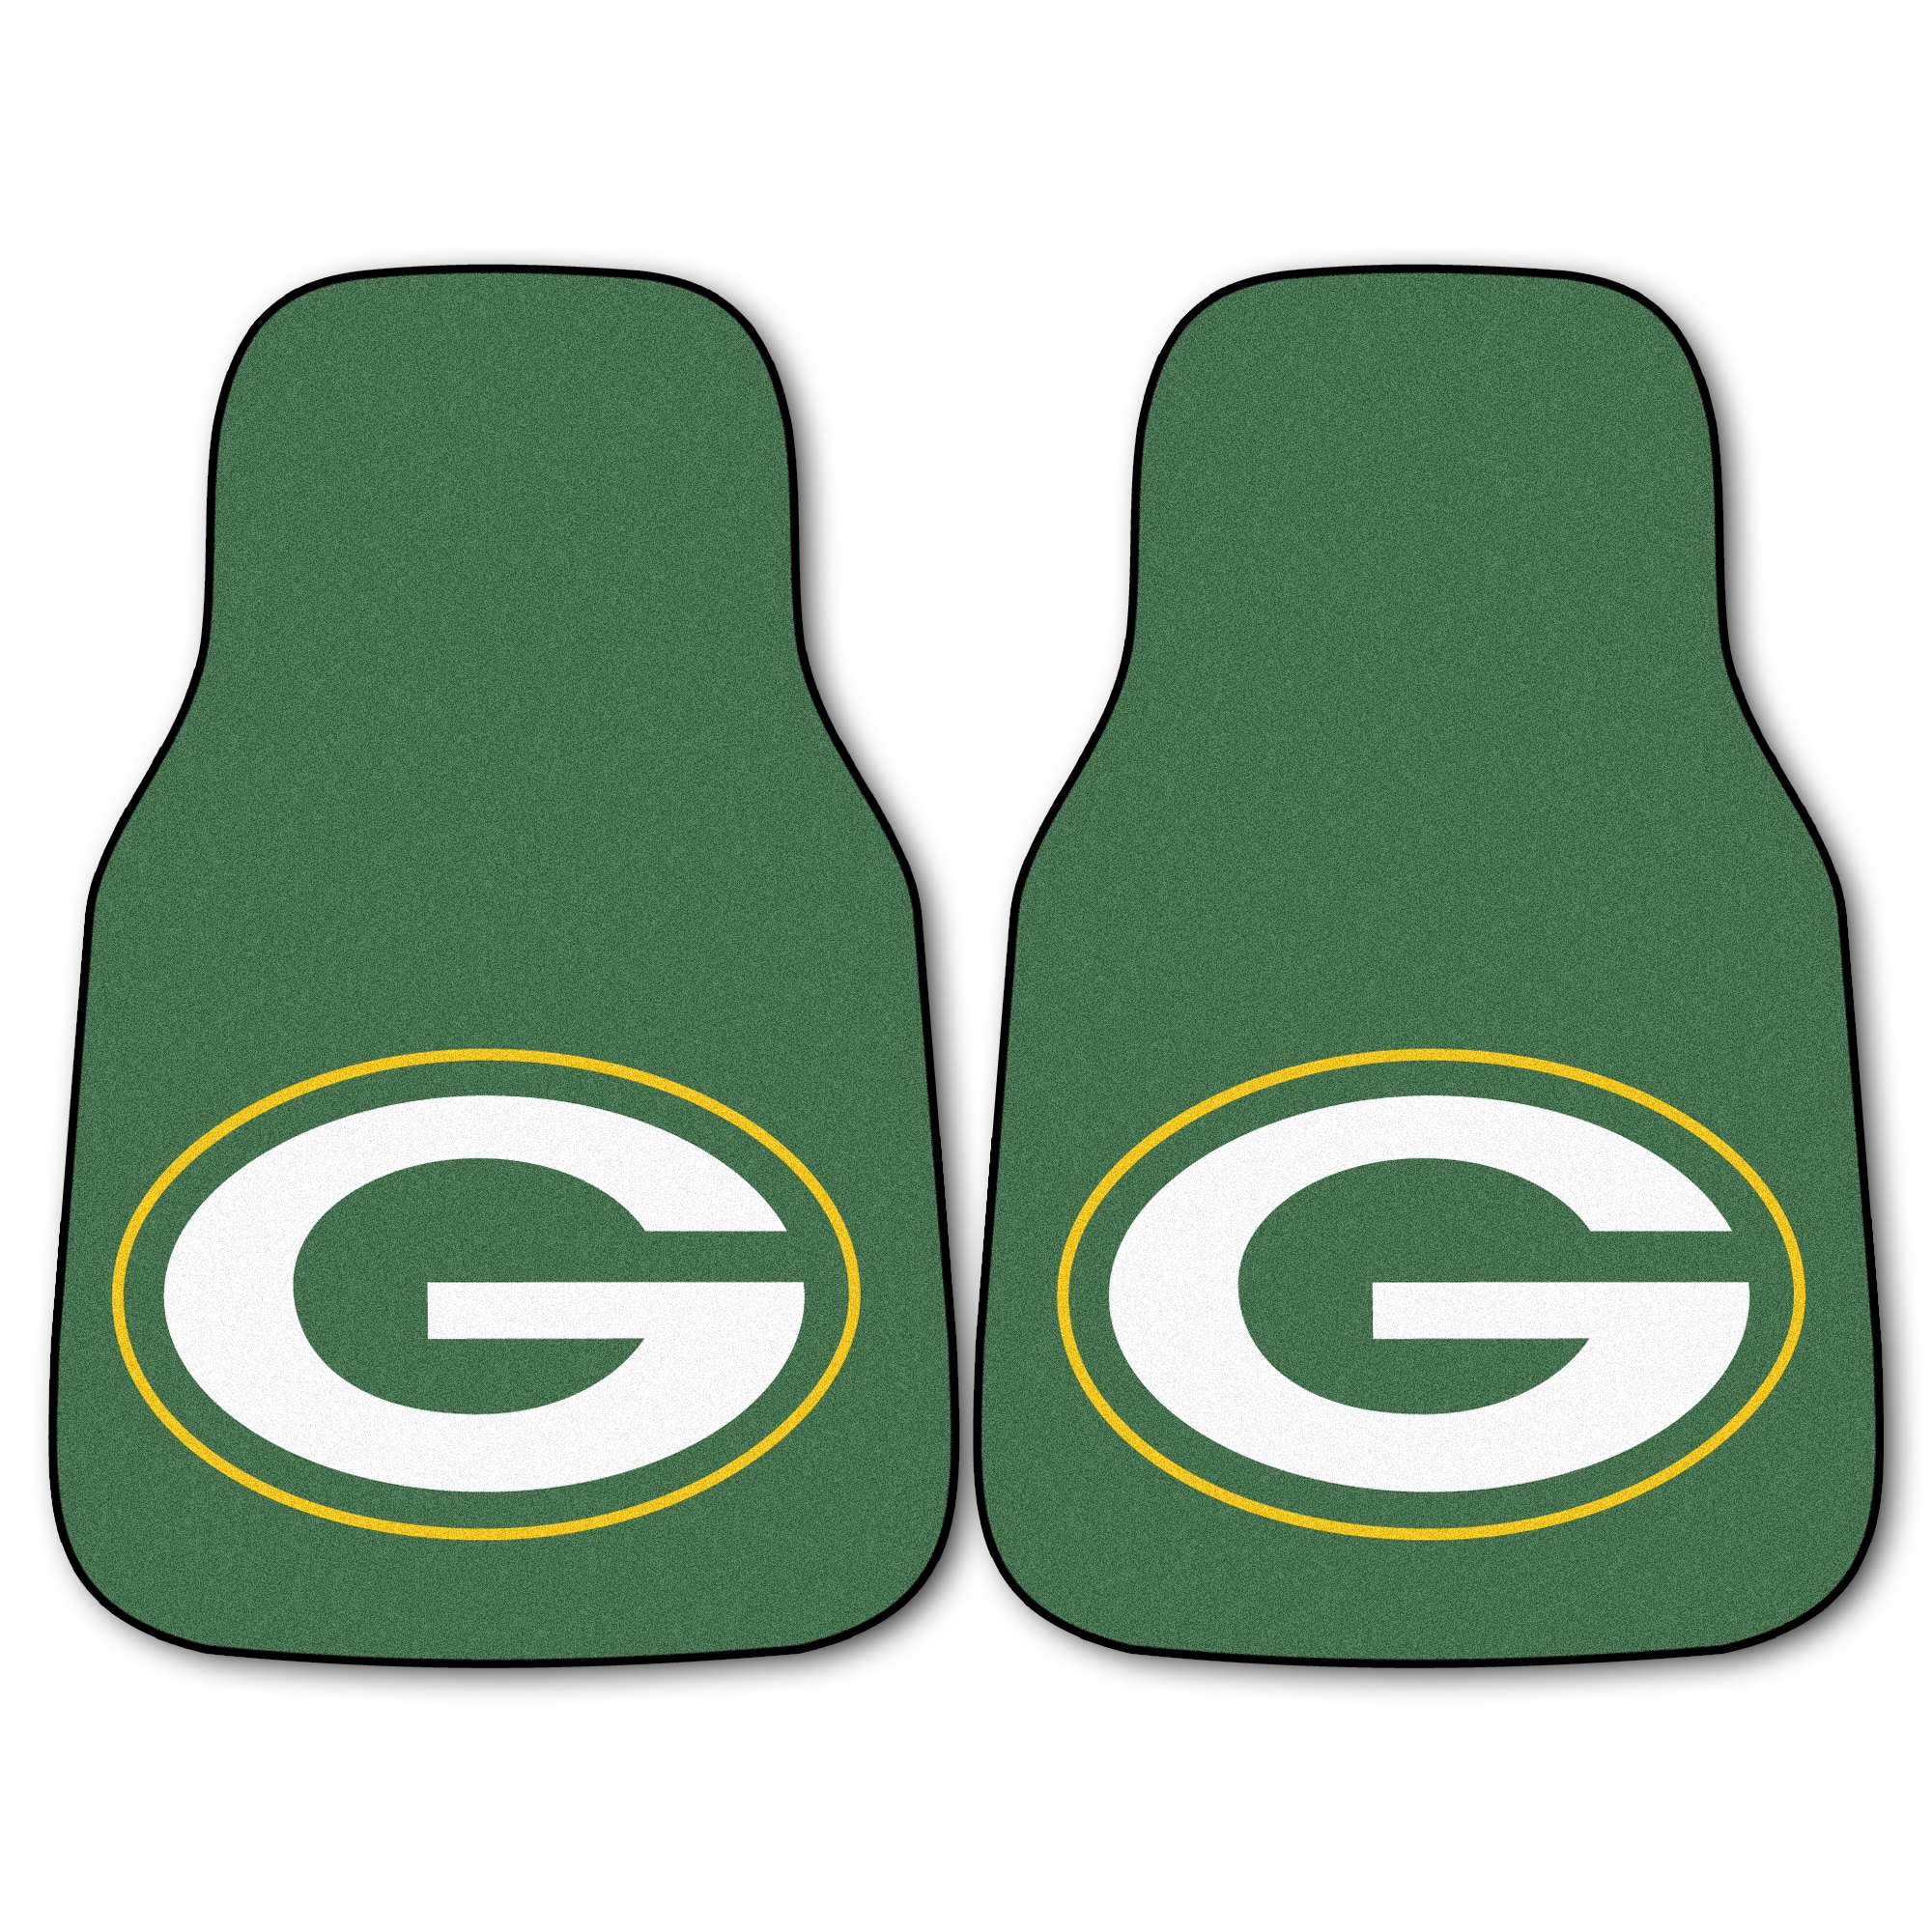 Green Bay Packers 2-pc Carpeted Car Mats 17"x27" - image 2 of 2